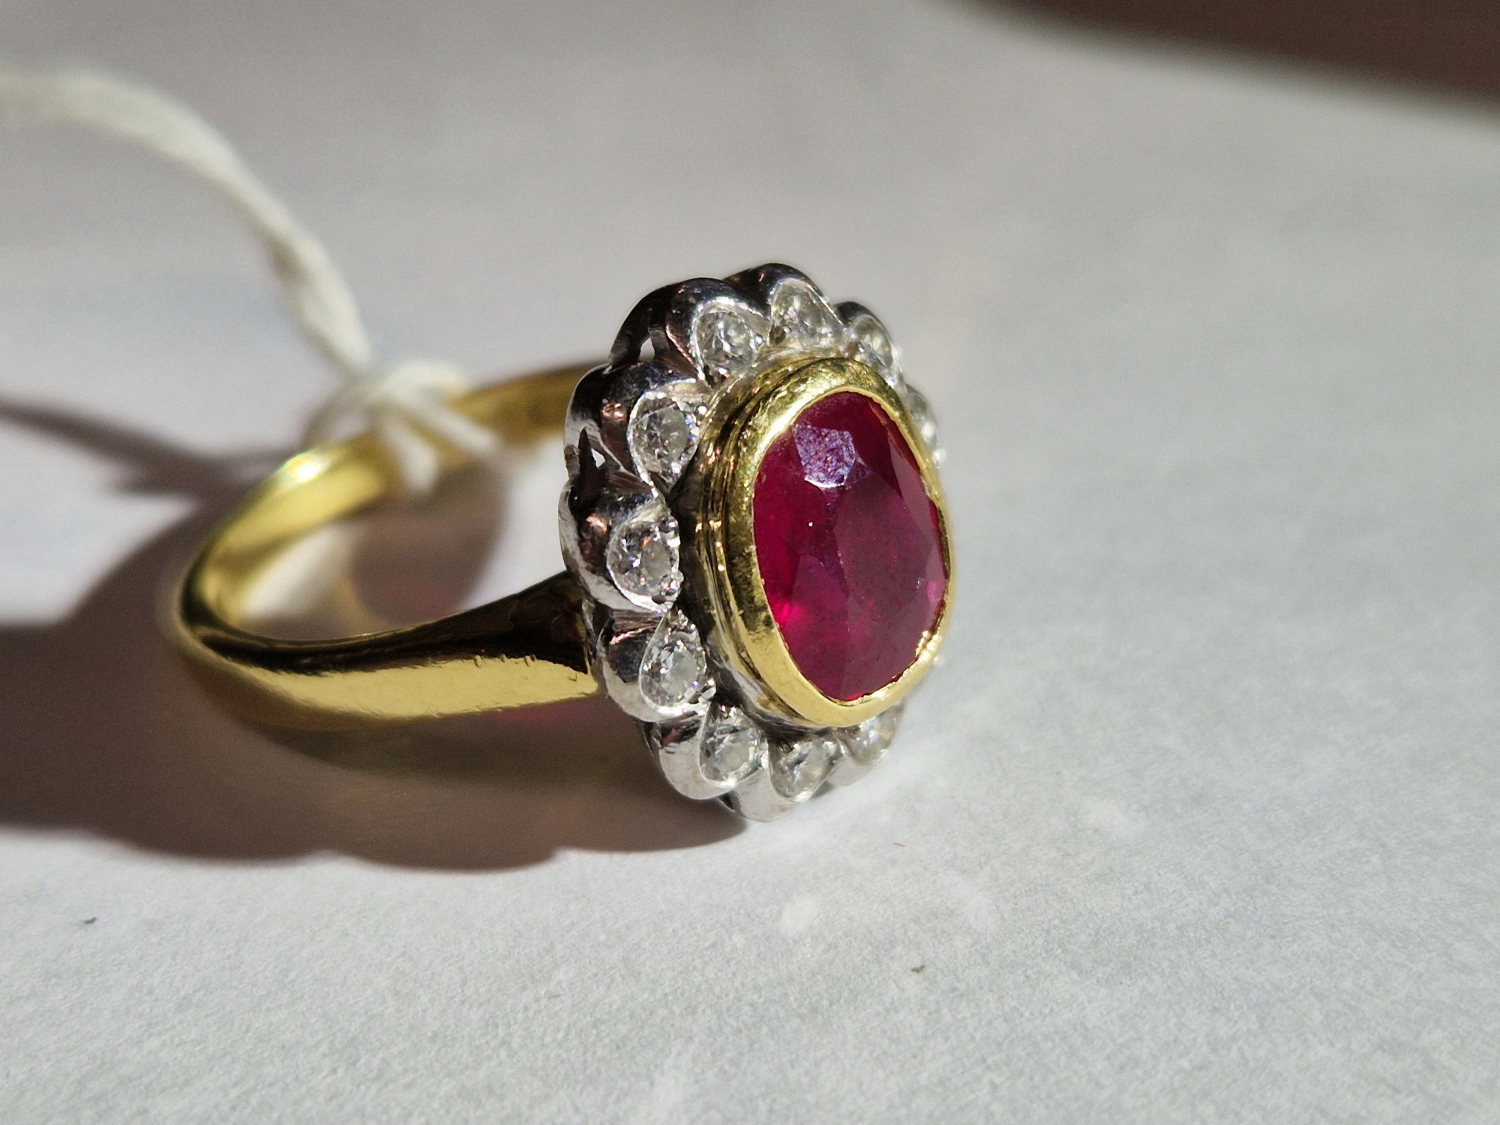 AN 18ct HALLMARKED GOLD RUBY AND DIAMOND OVAL SHAPED CLUSTER RING. THE SINGLE MEDIUM TO DARK - Image 16 of 20